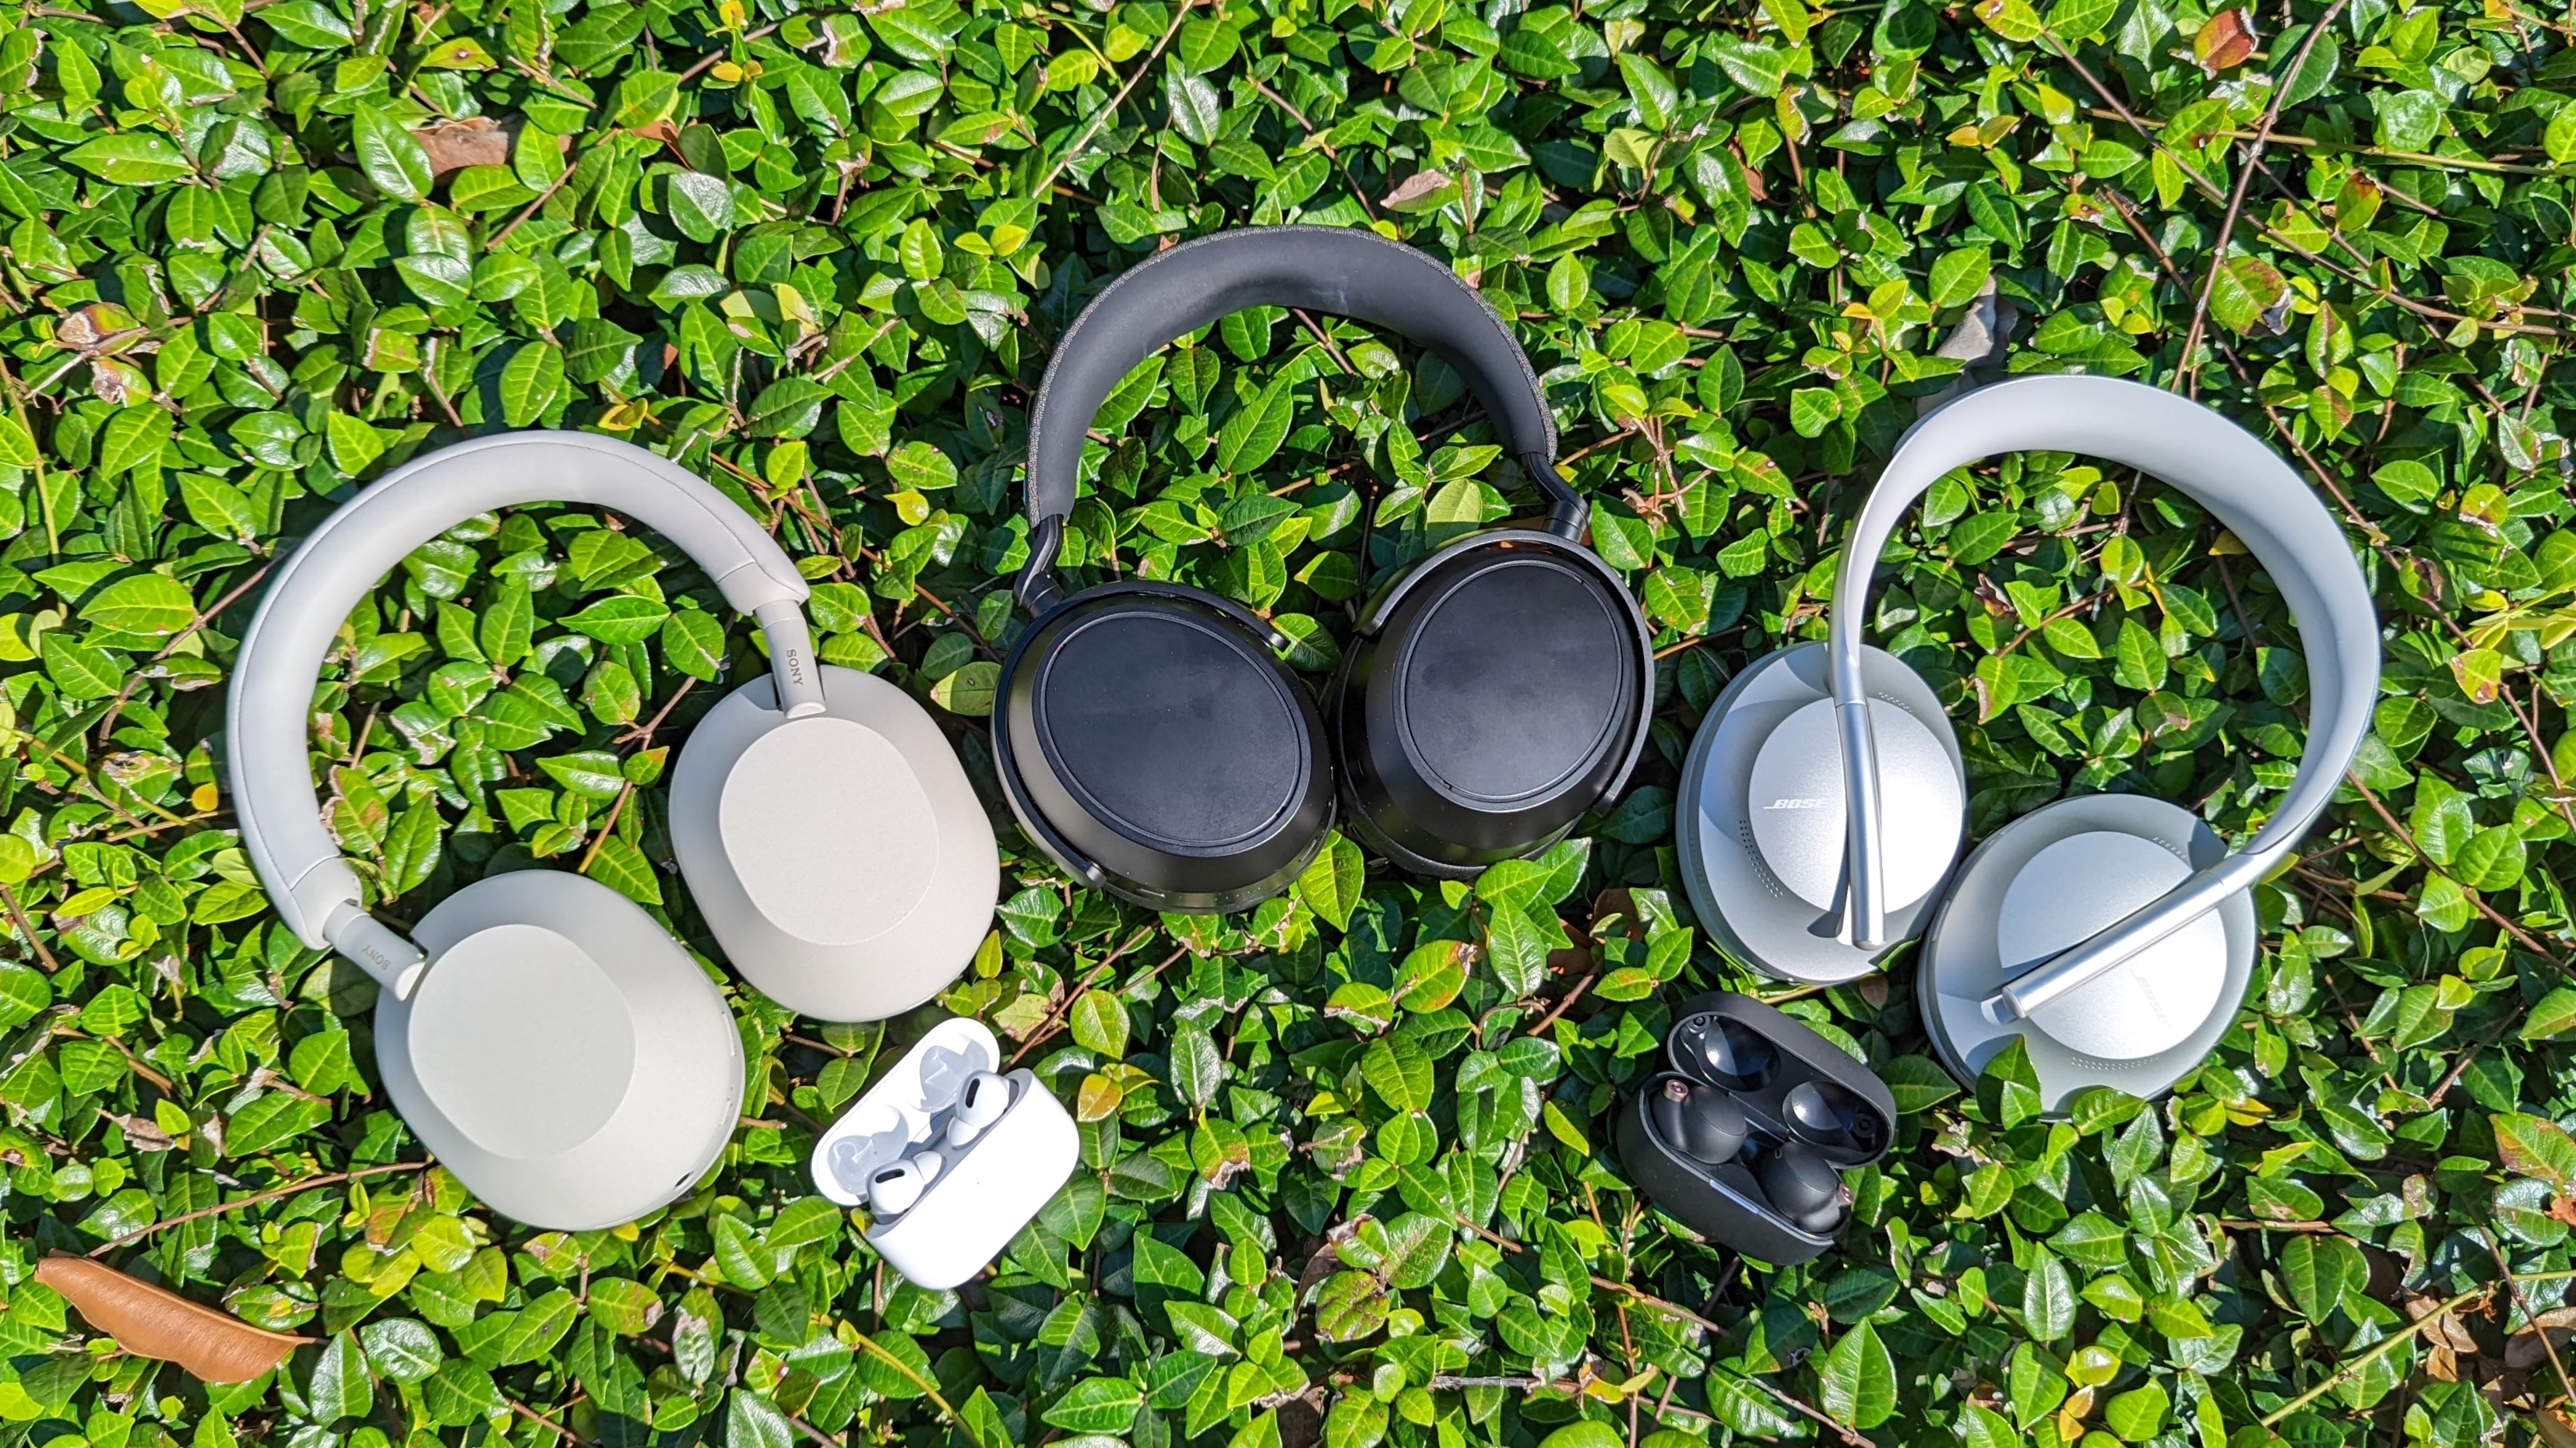 Best noise-cancelling headphones in 2022